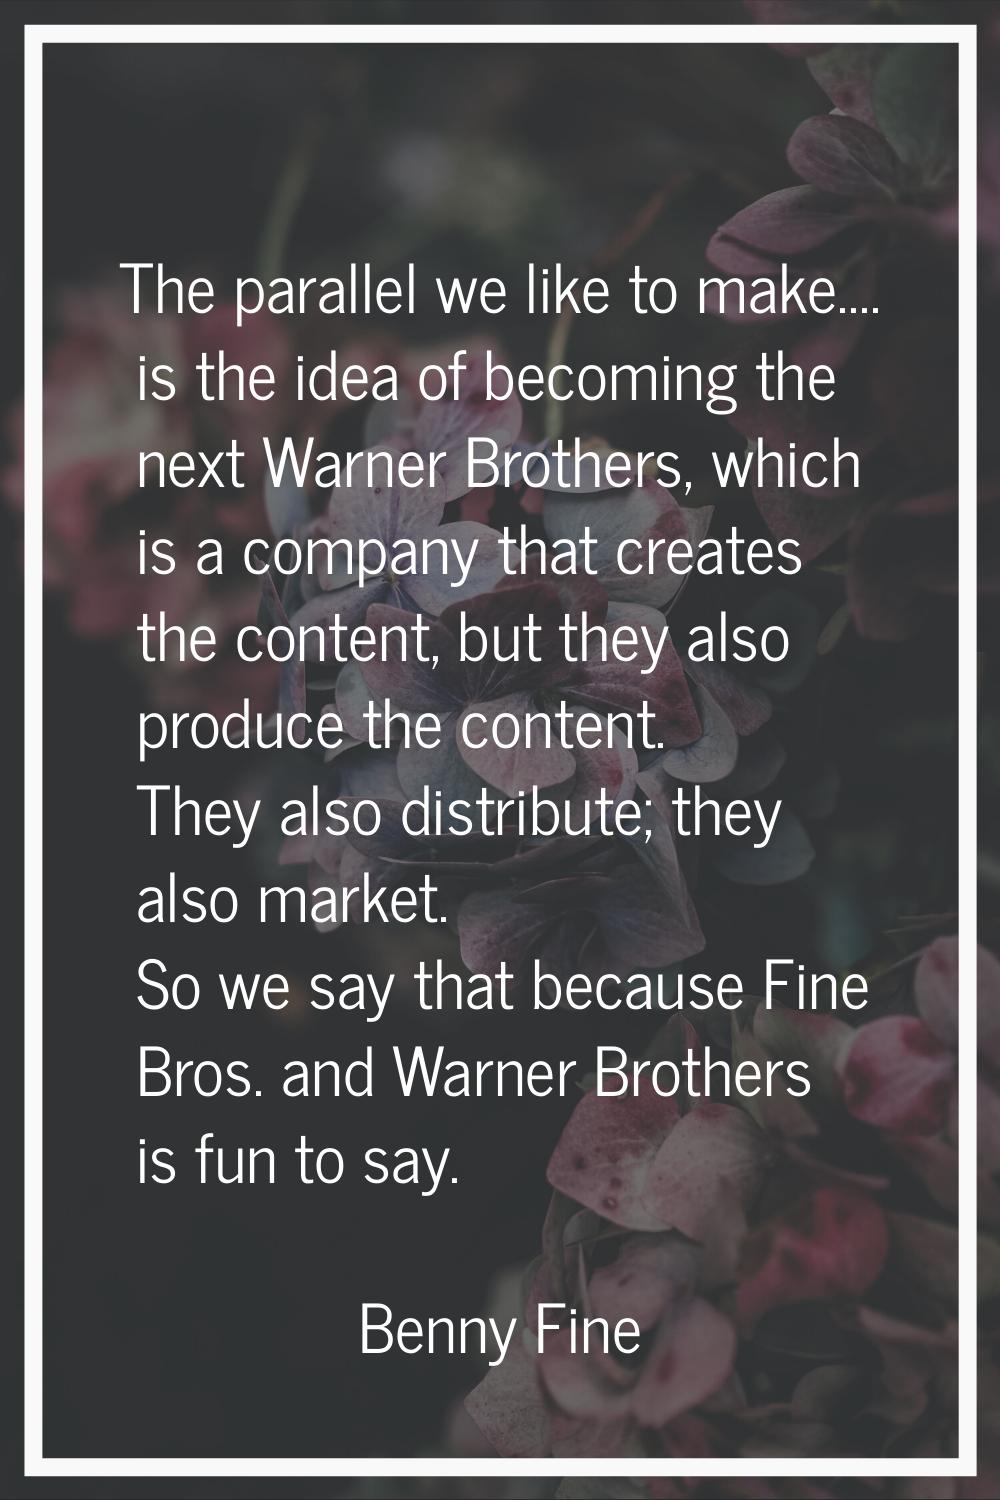 The parallel we like to make.... is the idea of becoming the next Warner Brothers, which is a compa